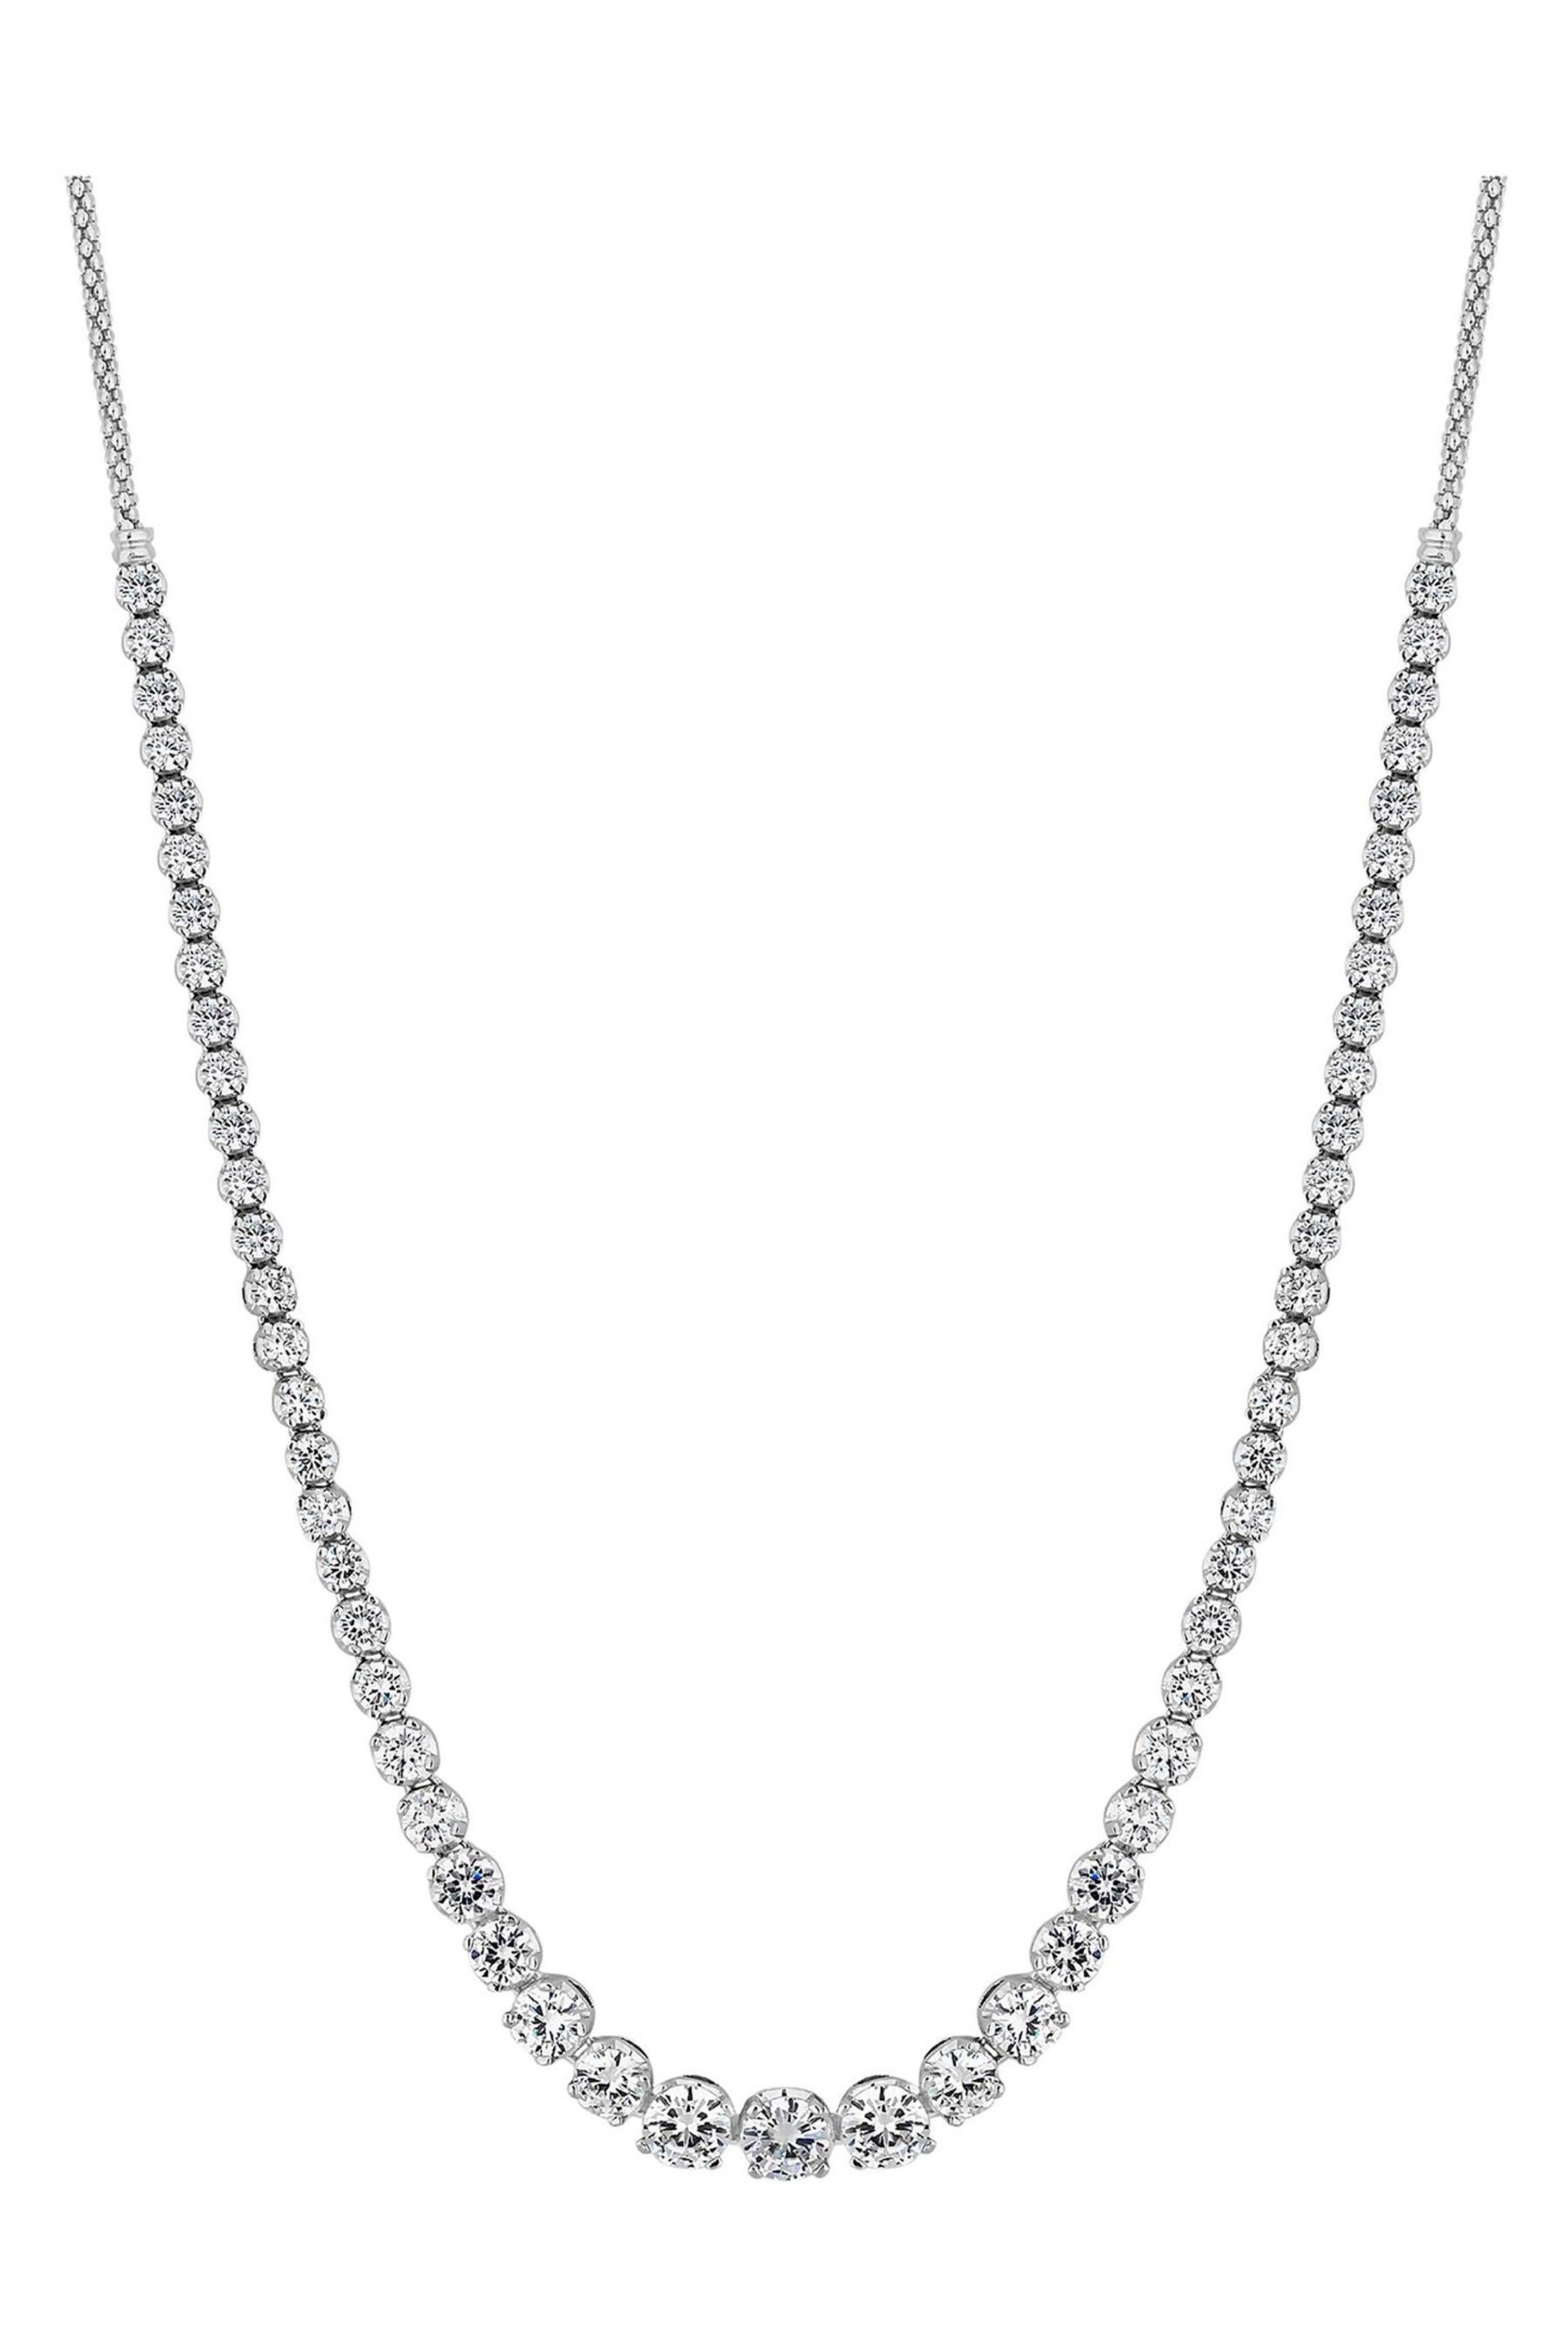 Jon Richard Silver Cubic Zirconia Graduated Tennis Necklace in a Gift Box - Image 1 of 2